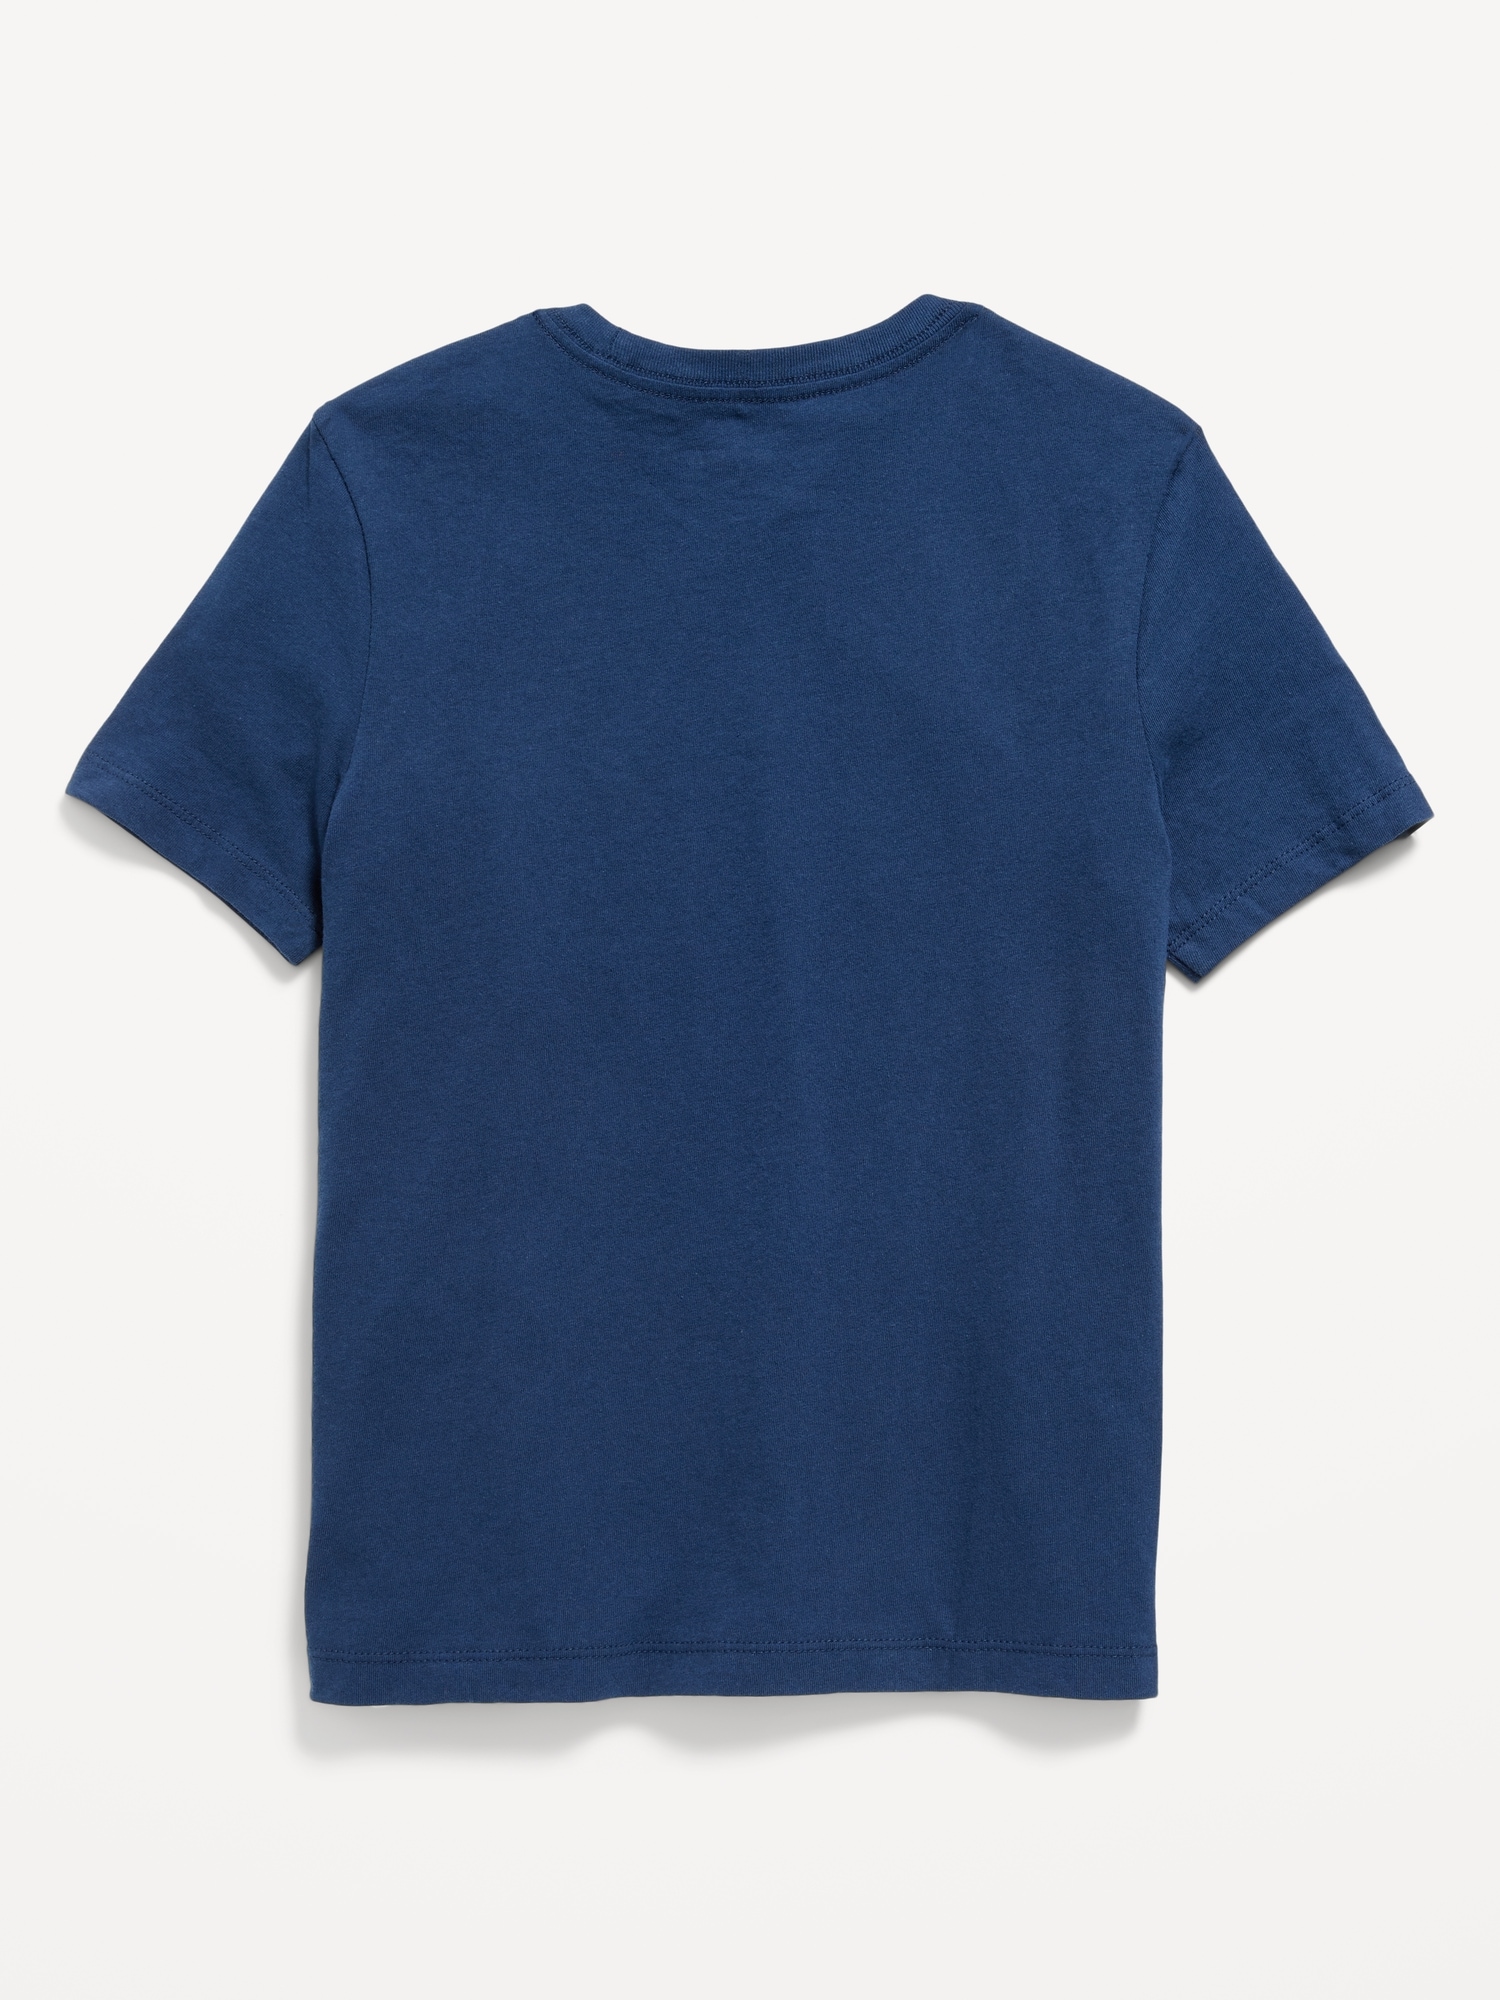 Kirby™ Gender-Neutral Graphic T-Shirt for Kids | Old Navy